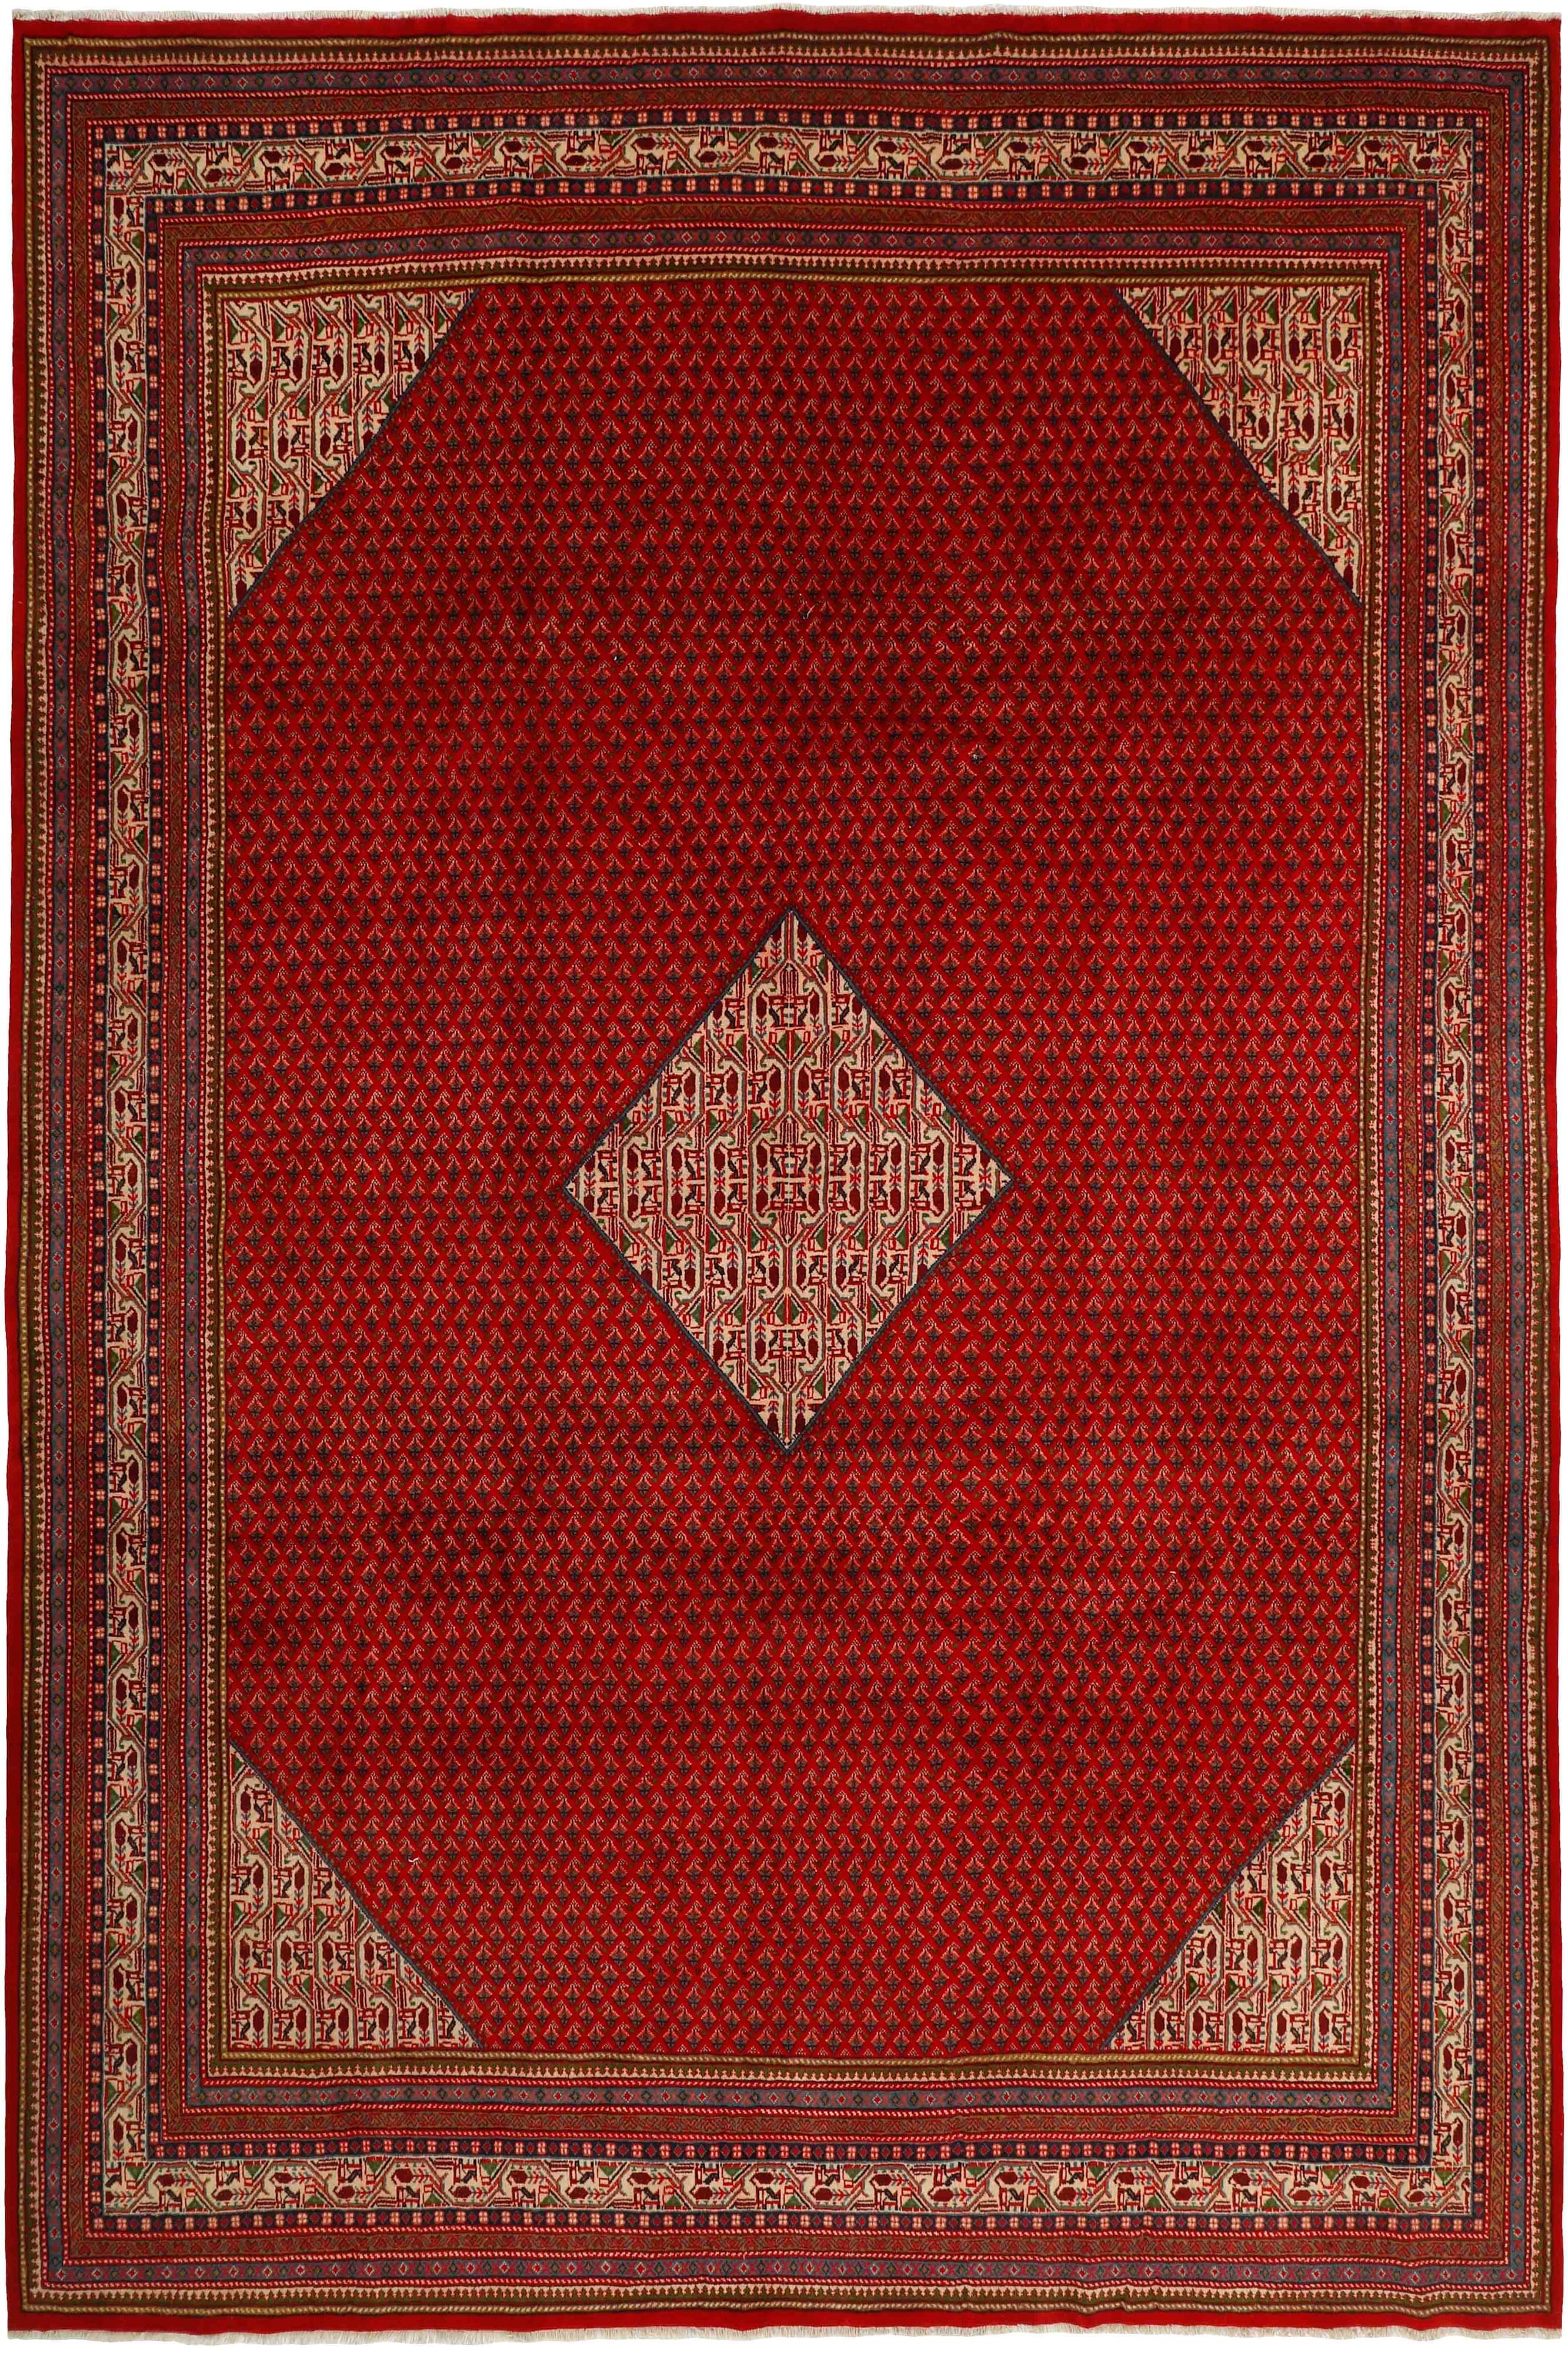 authentic persian rug with all-over traditional design in red, beige and blue